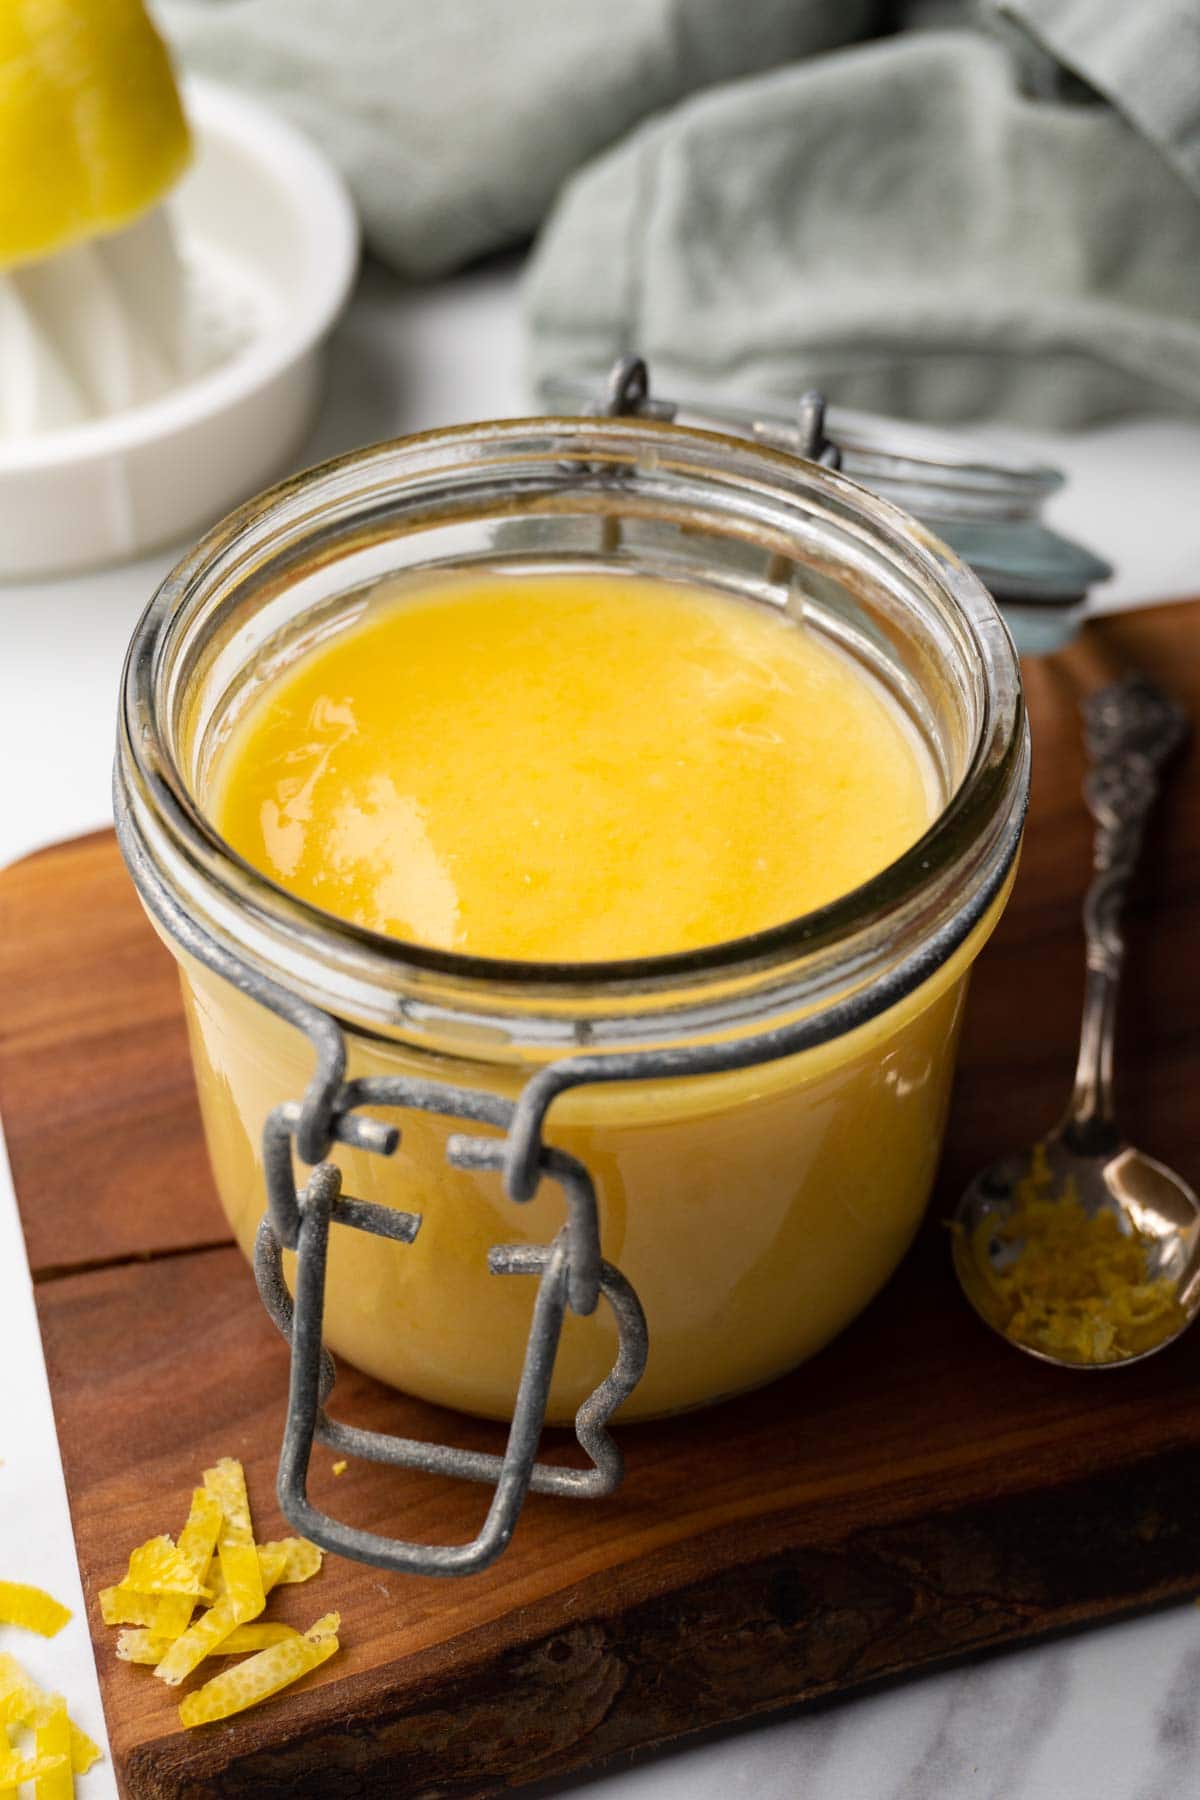 A glass jar filled with lemon curd is standing on a wooden board.